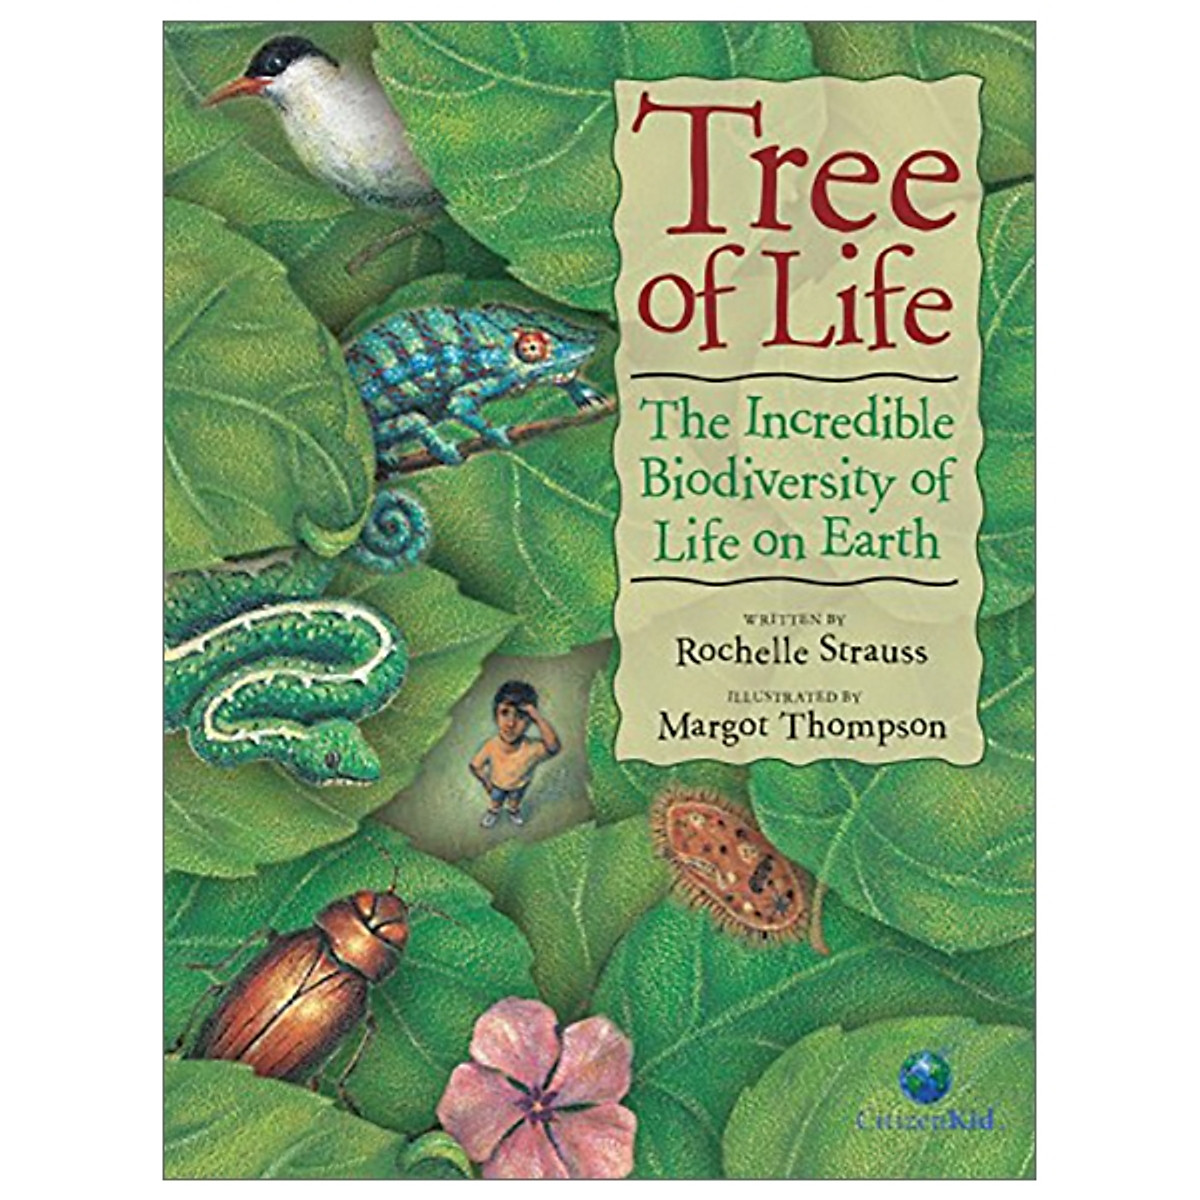 Tree Of Life: The Incredible Biodiversity Of Life On Earth (CitizenKid)